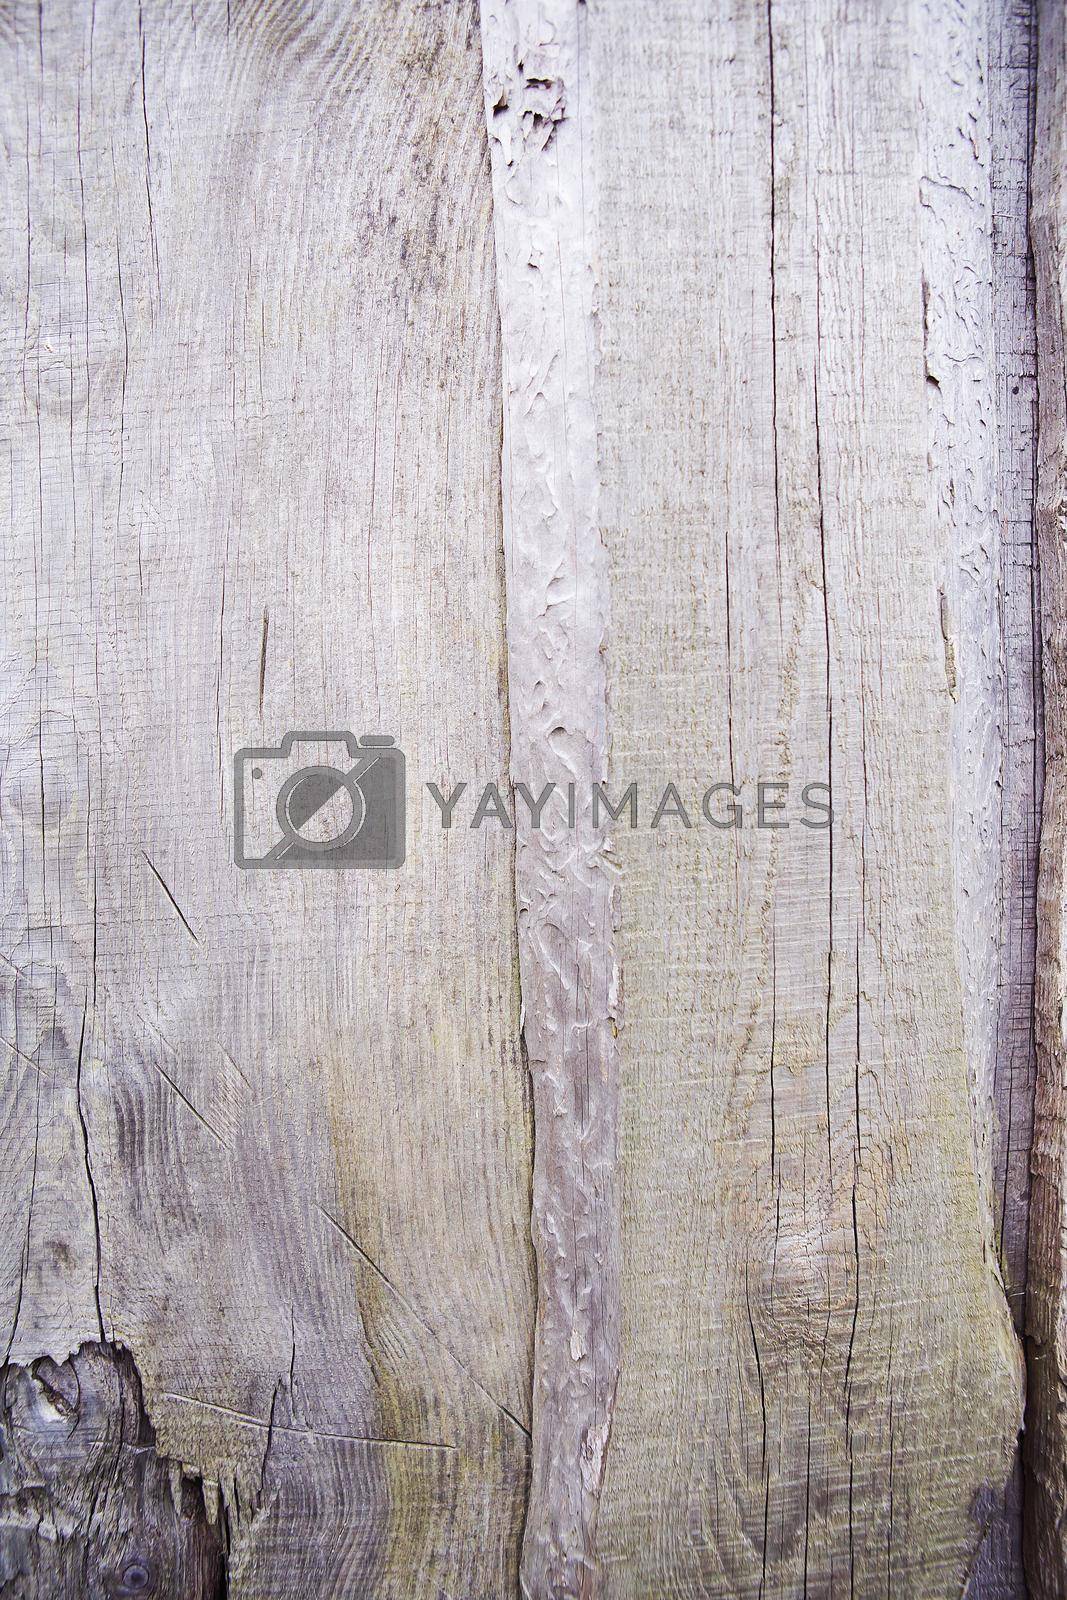 Very old wooden texture, carpentry, decorative wall